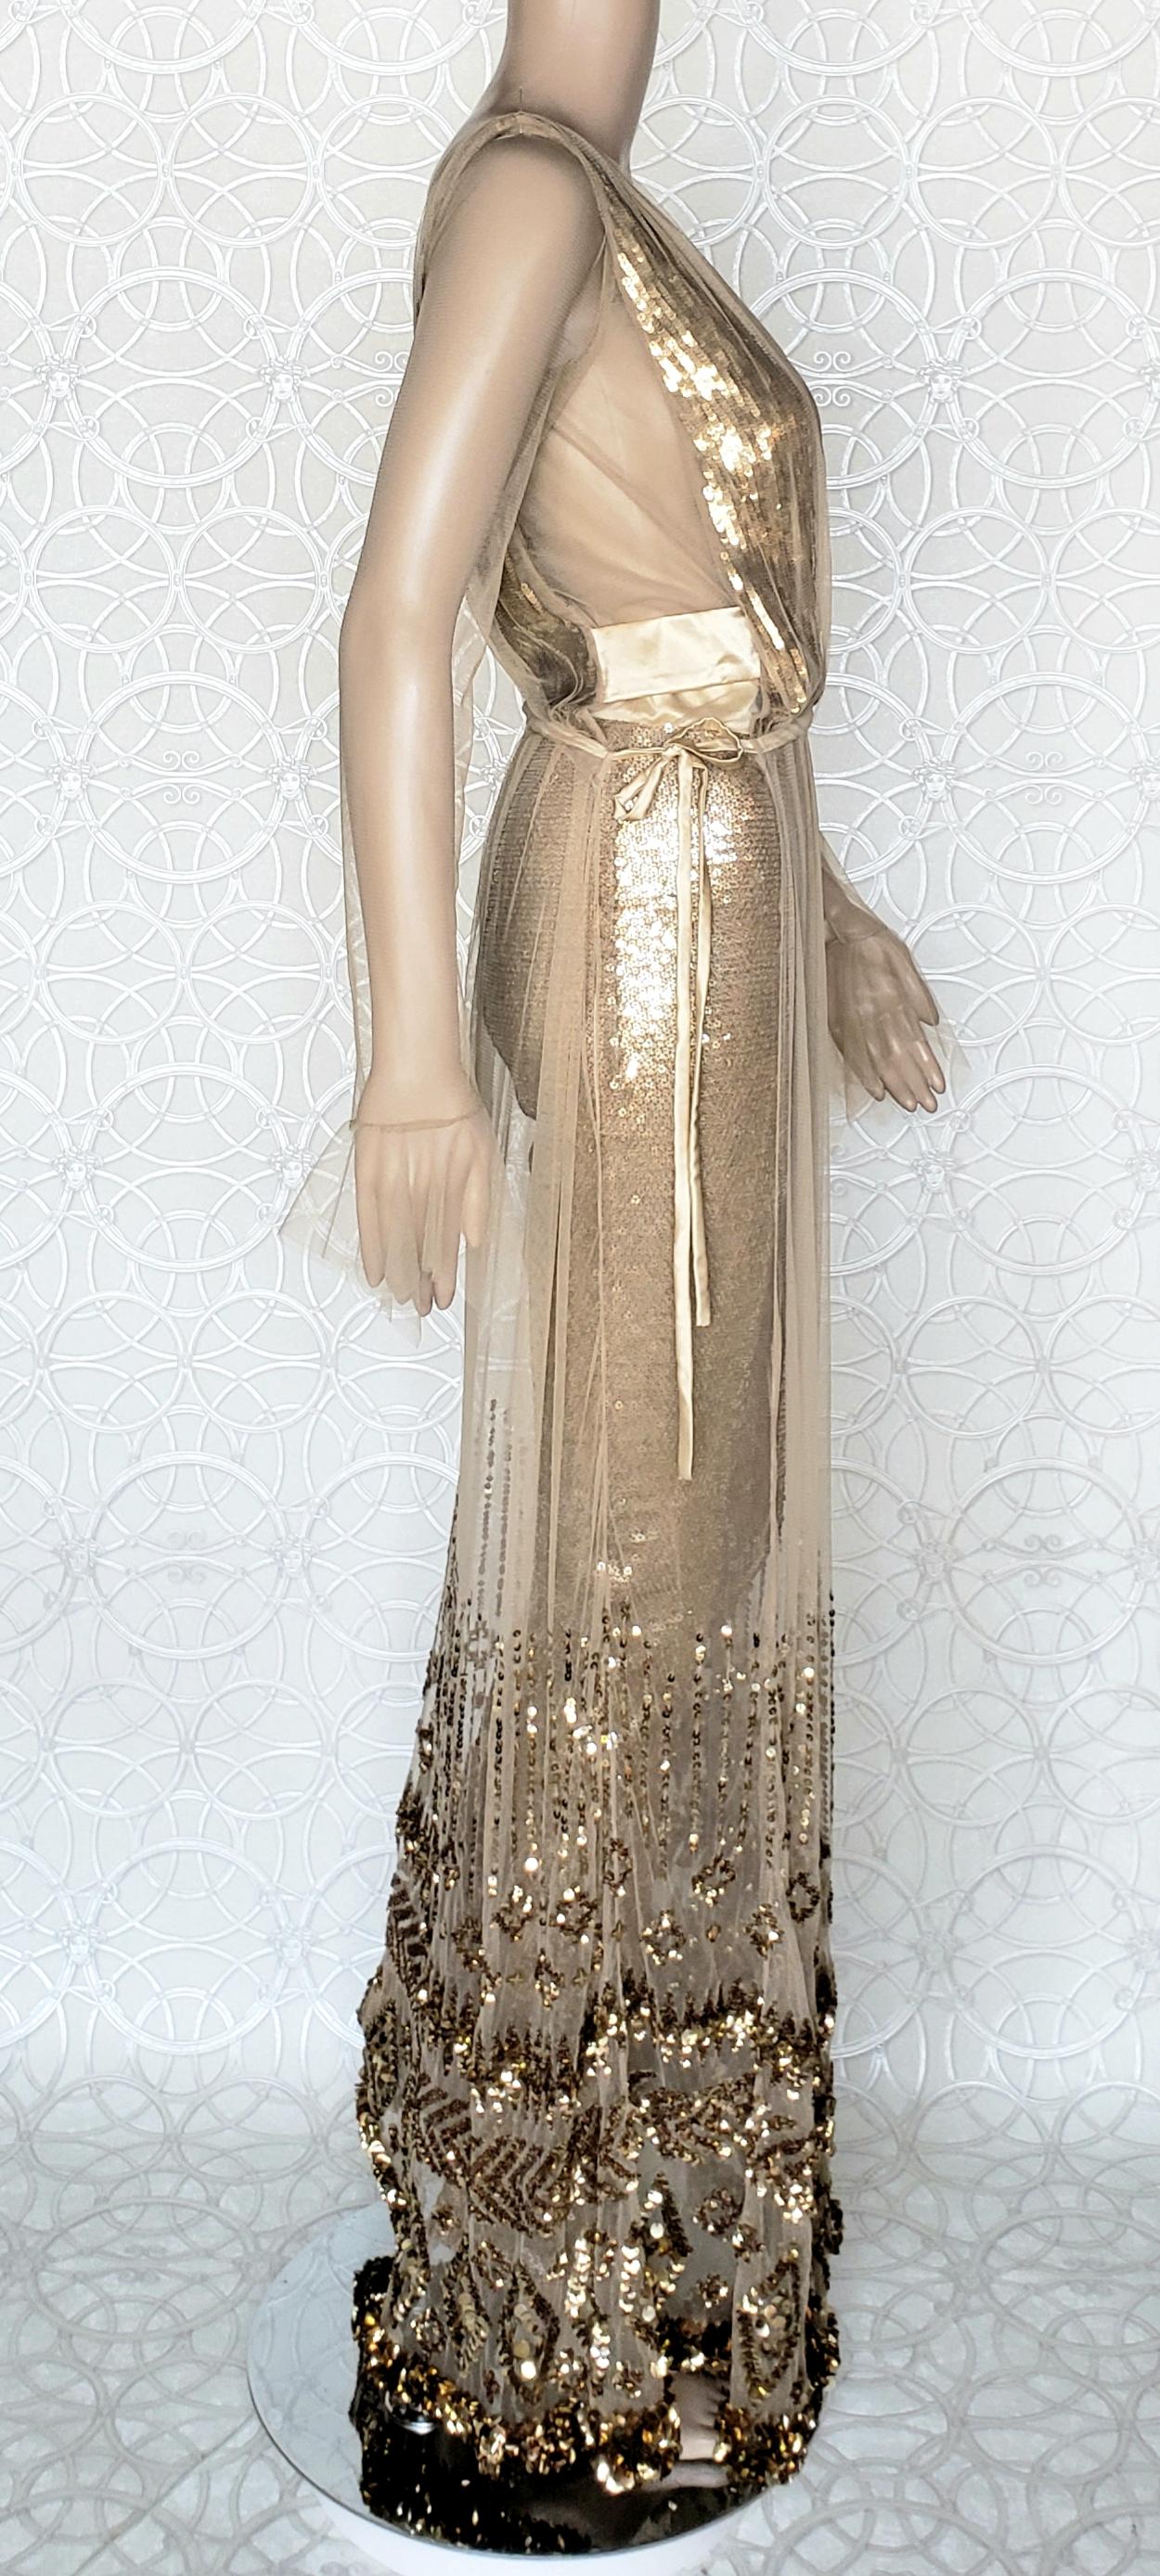 Brown New TOM FORD NUDE EMBELLISHED CHIFFON DRESS w/ GOLD SEQUIN PANTS 38 - 2